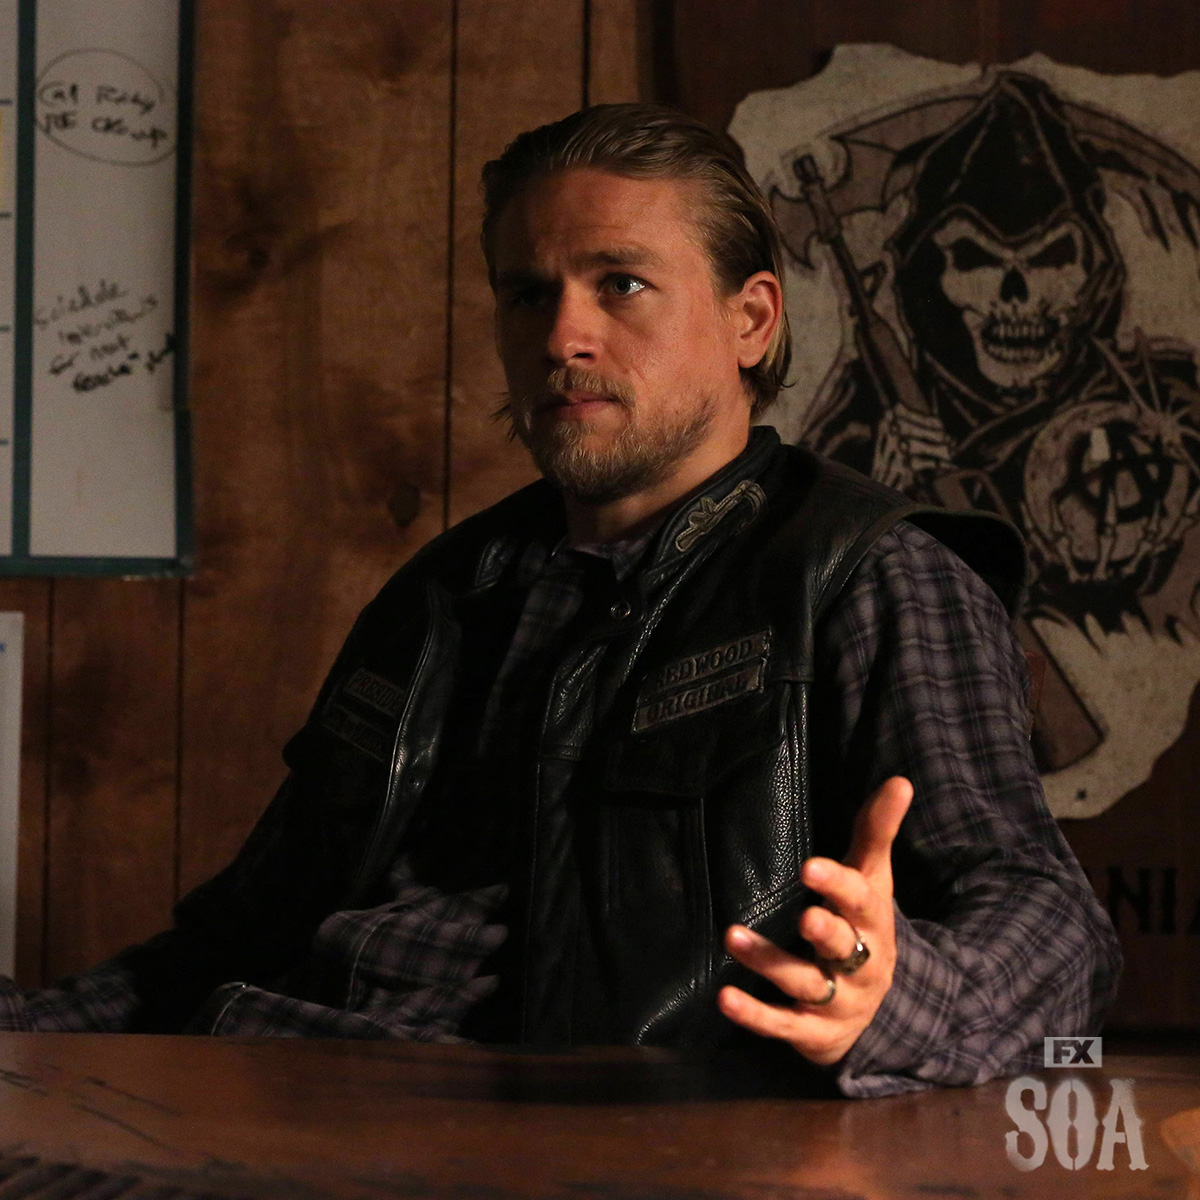 You’ve come to the right place. All episodes of FX’s Sons of Anarchy are now available. Stream on Hulu.